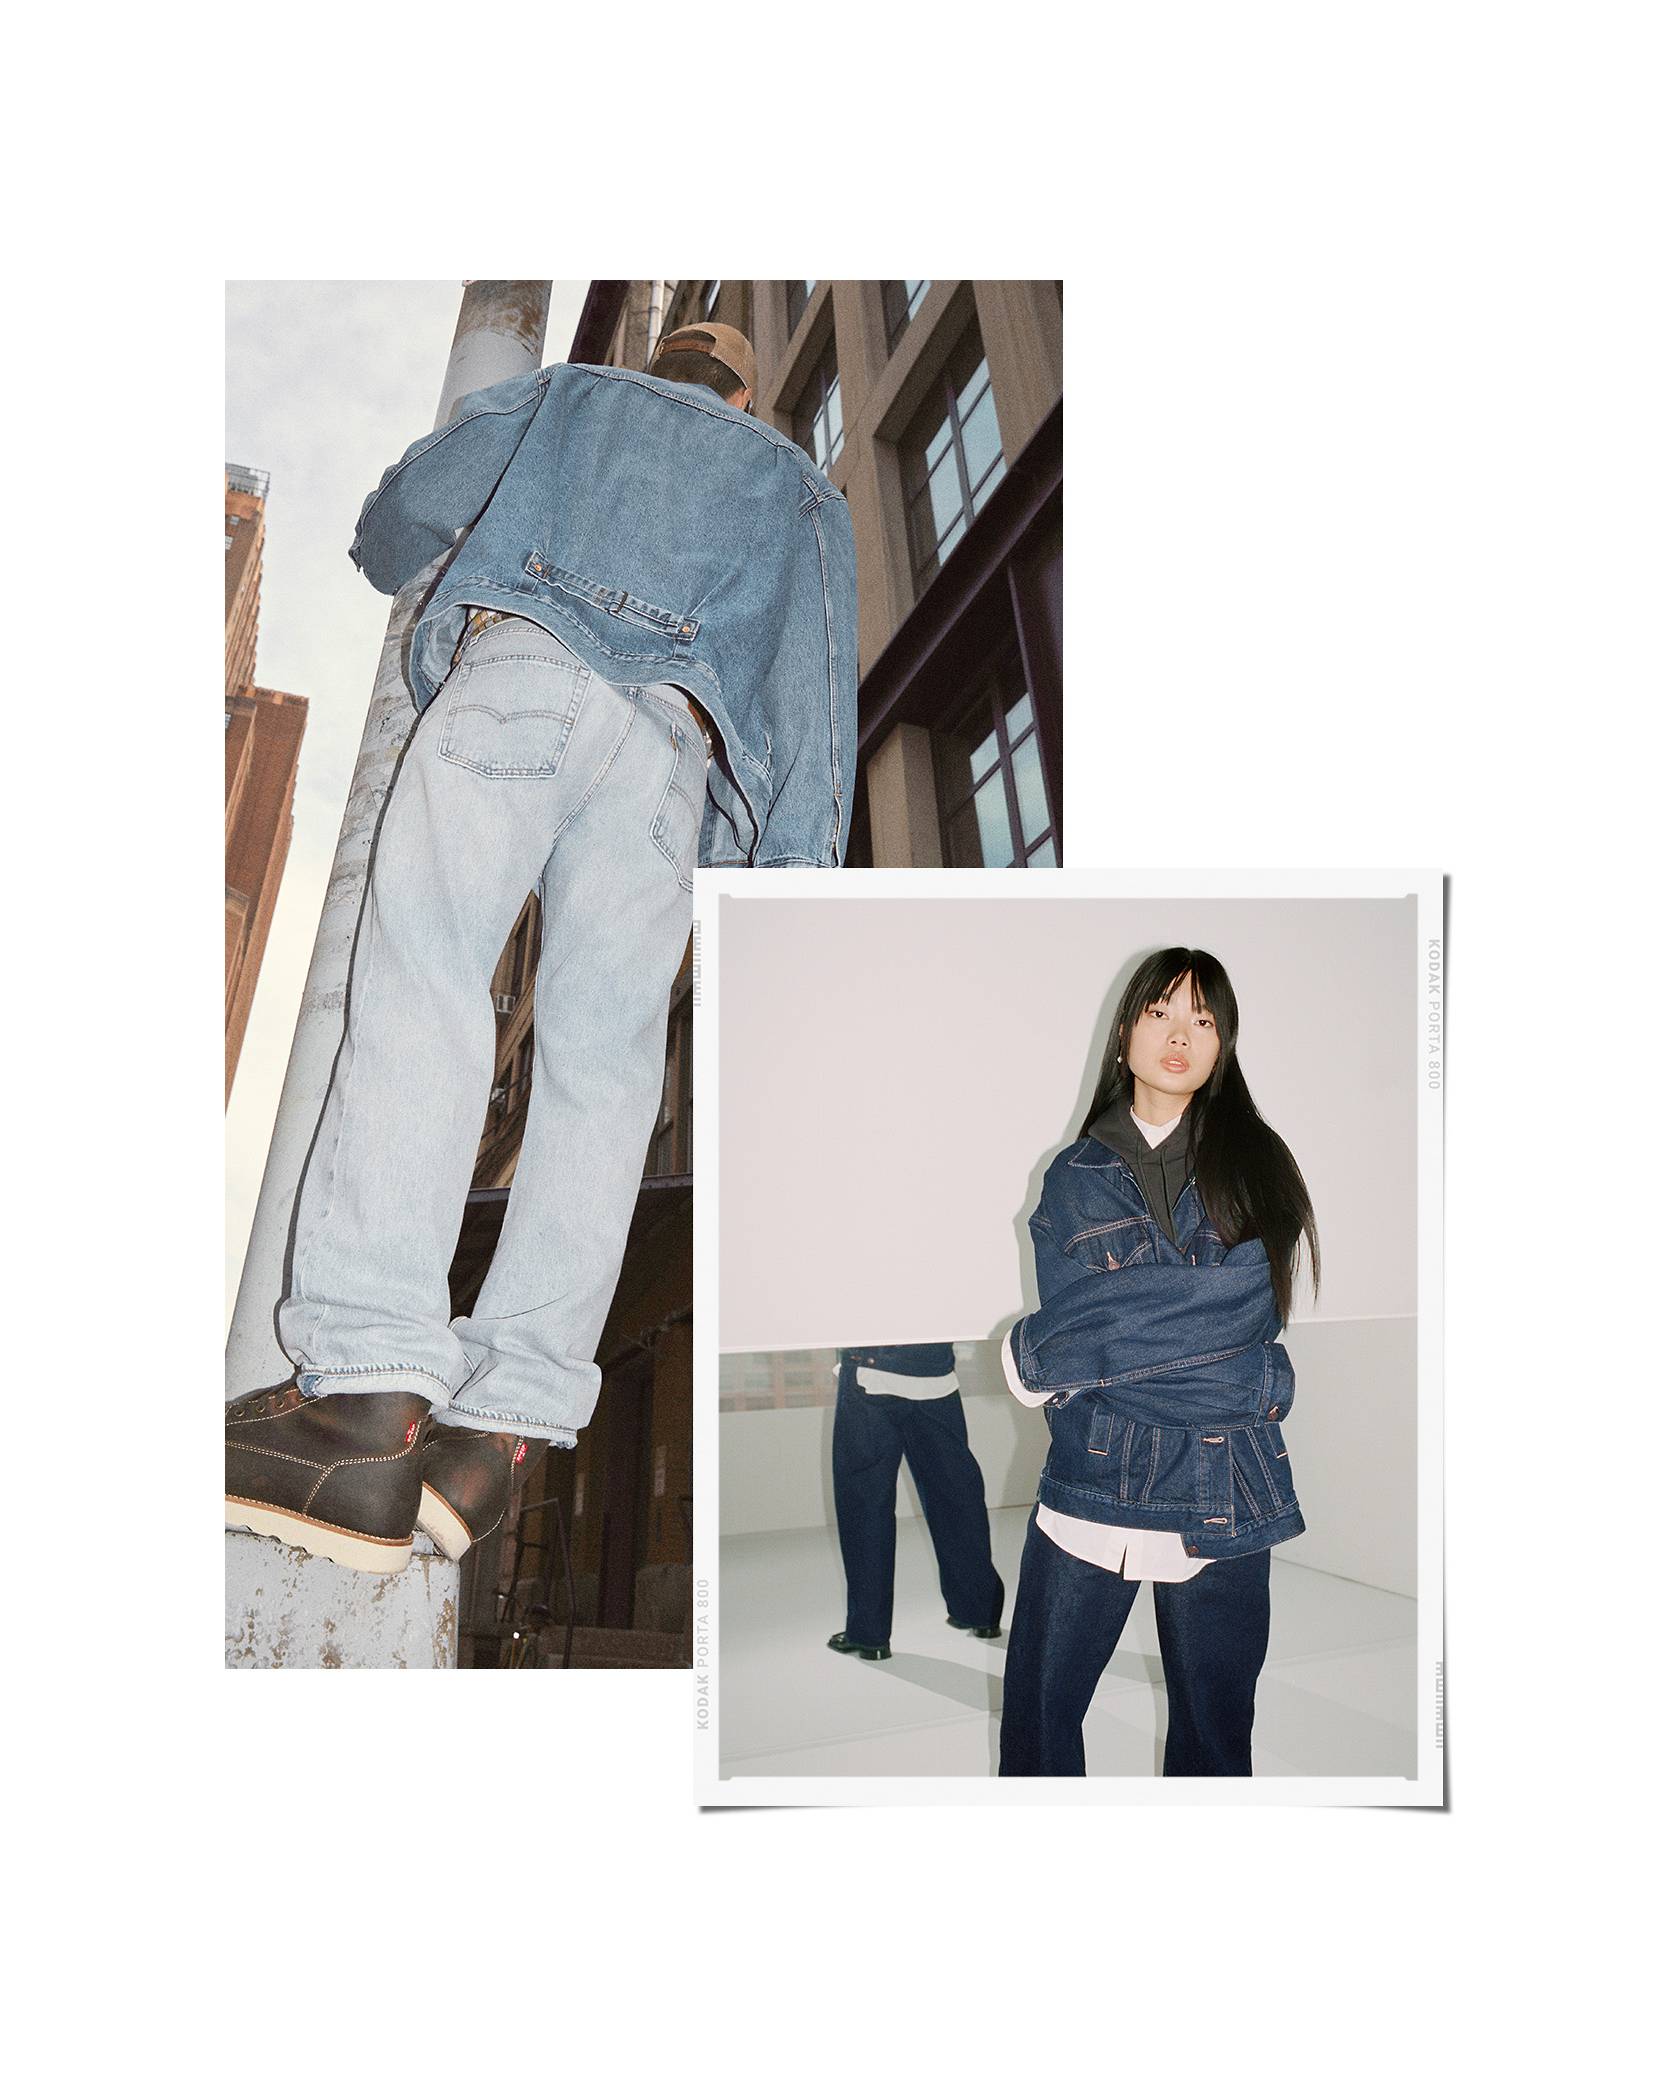 Oversized Clothing: How to Style It | Off The Cuff - Levi's